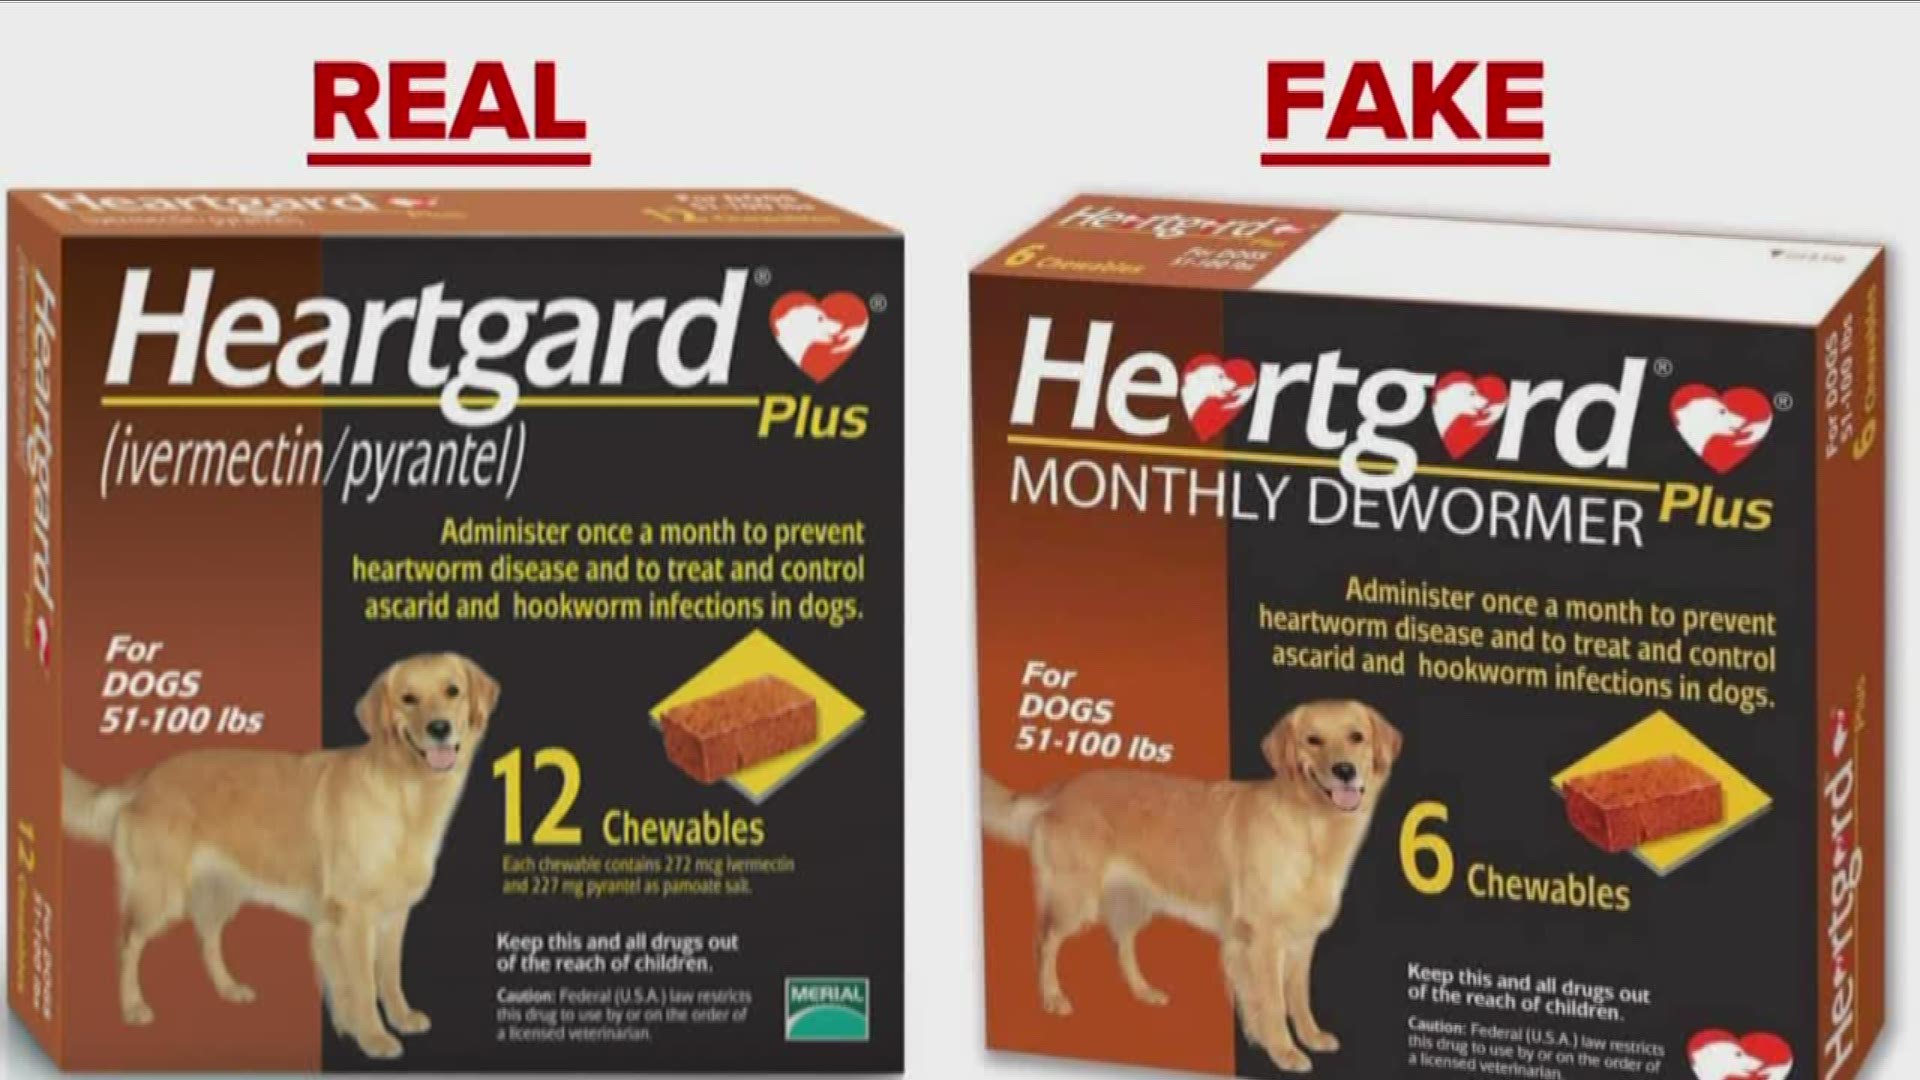 The FDA says counterfeit pet medications are becoming a significant concern.